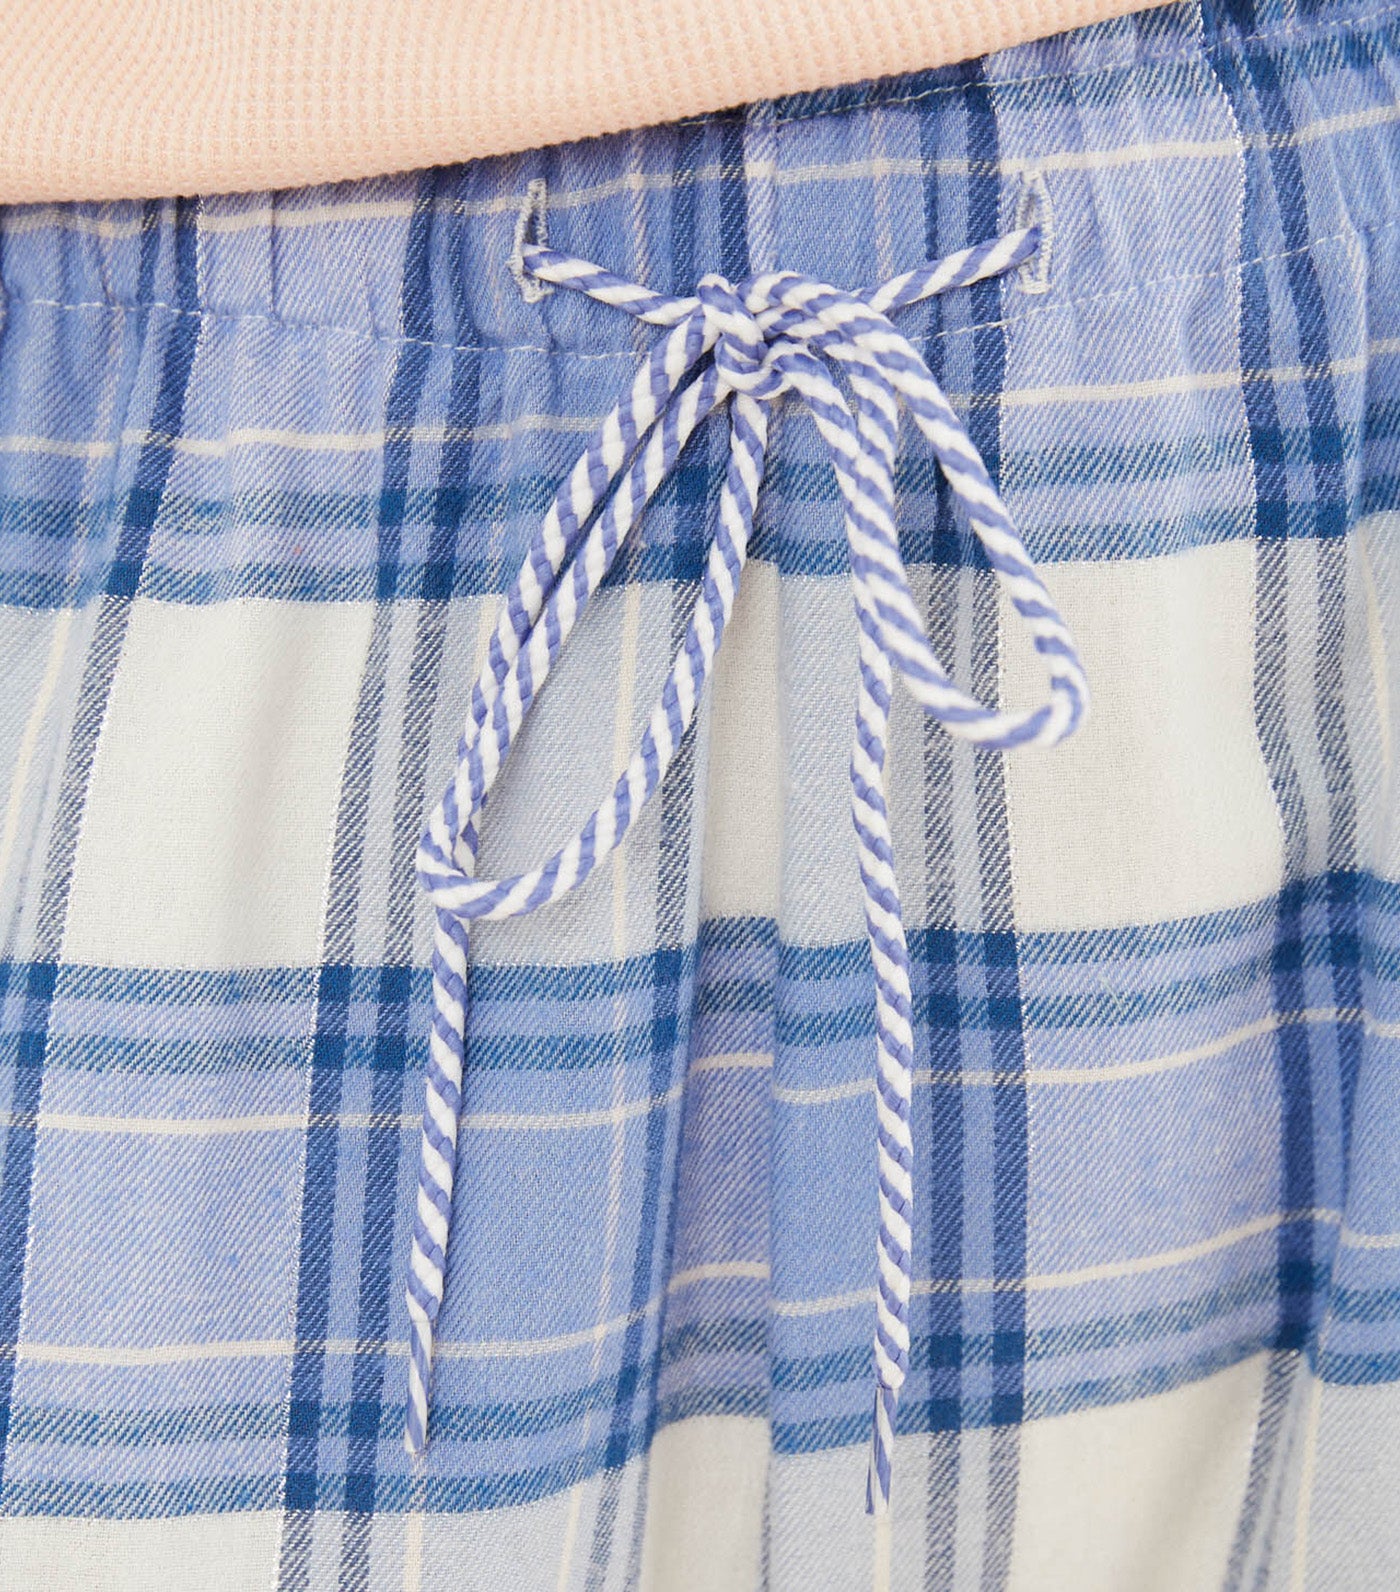 Long Checked Cotton Flannel Pajama Bottoms Blue